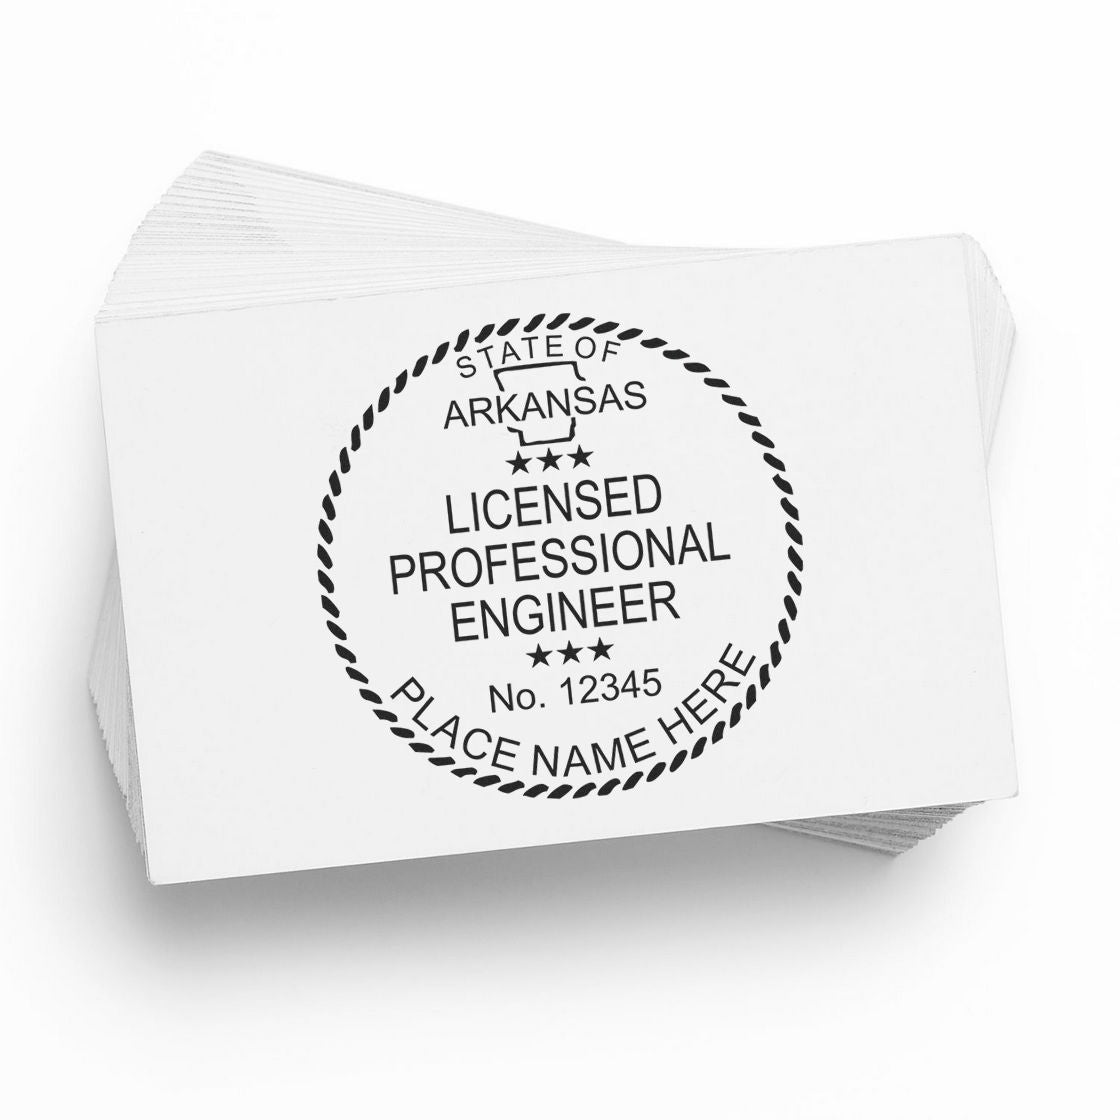 Another Example of a stamped impression of the Arkansas Professional Engineer Seal Stamp on a piece of office paper.